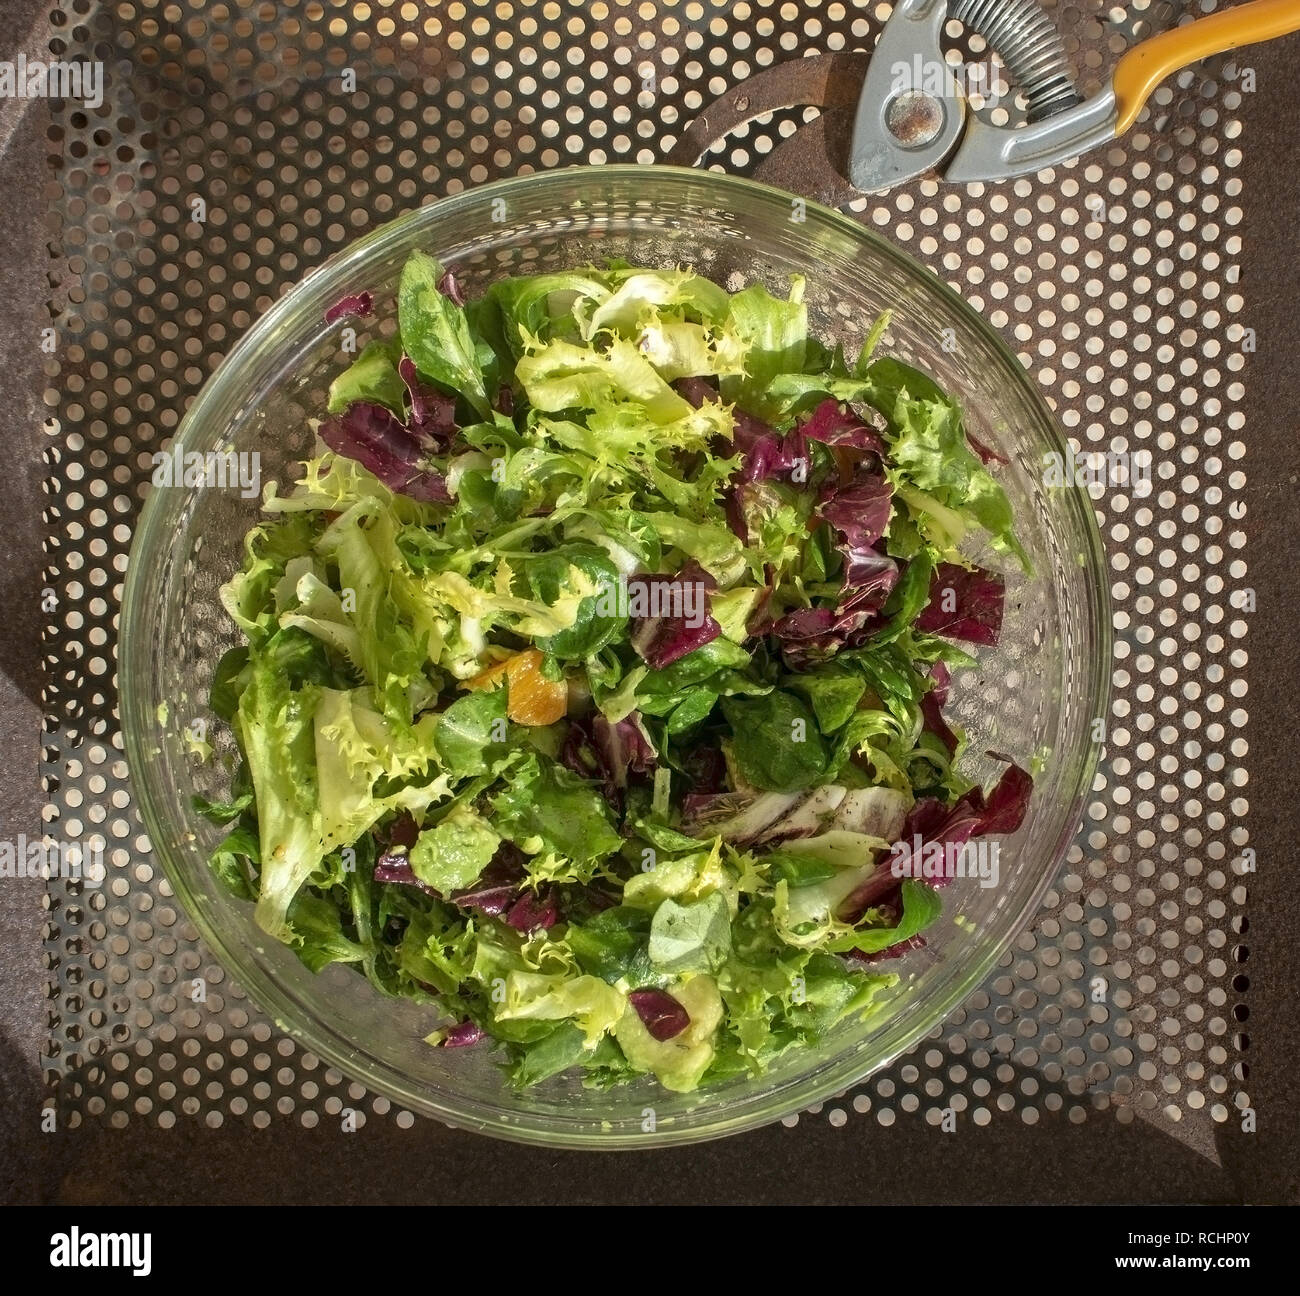 Mixed green and purple salad in glass bowl on rusty iron background. Stock Photo